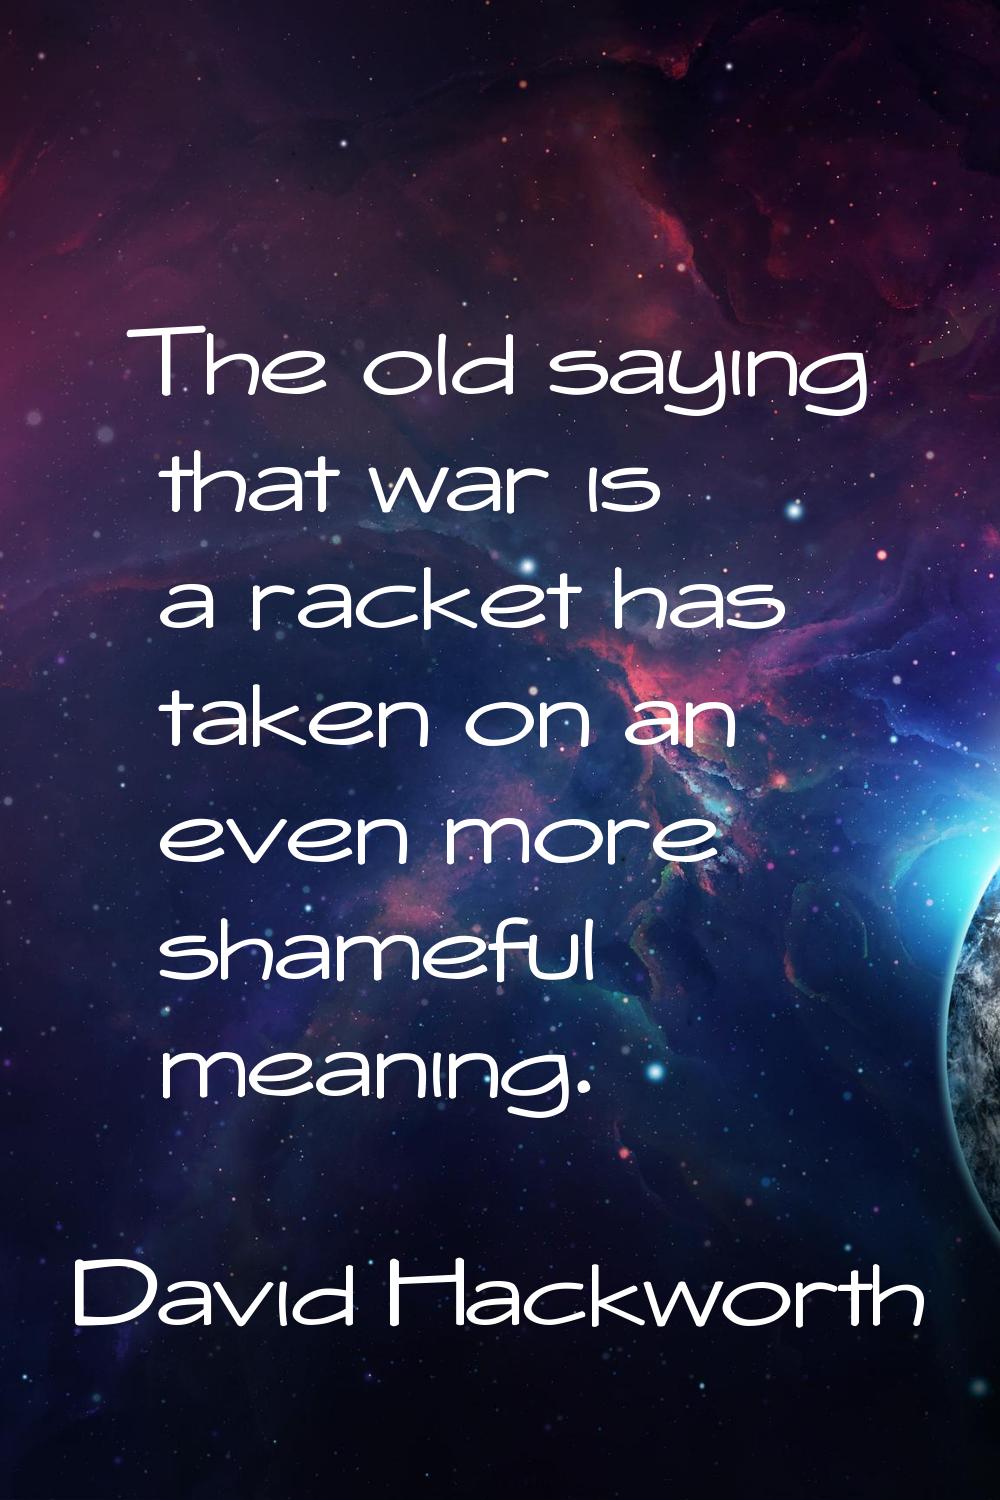 The old saying that war is a racket has taken on an even more shameful meaning.